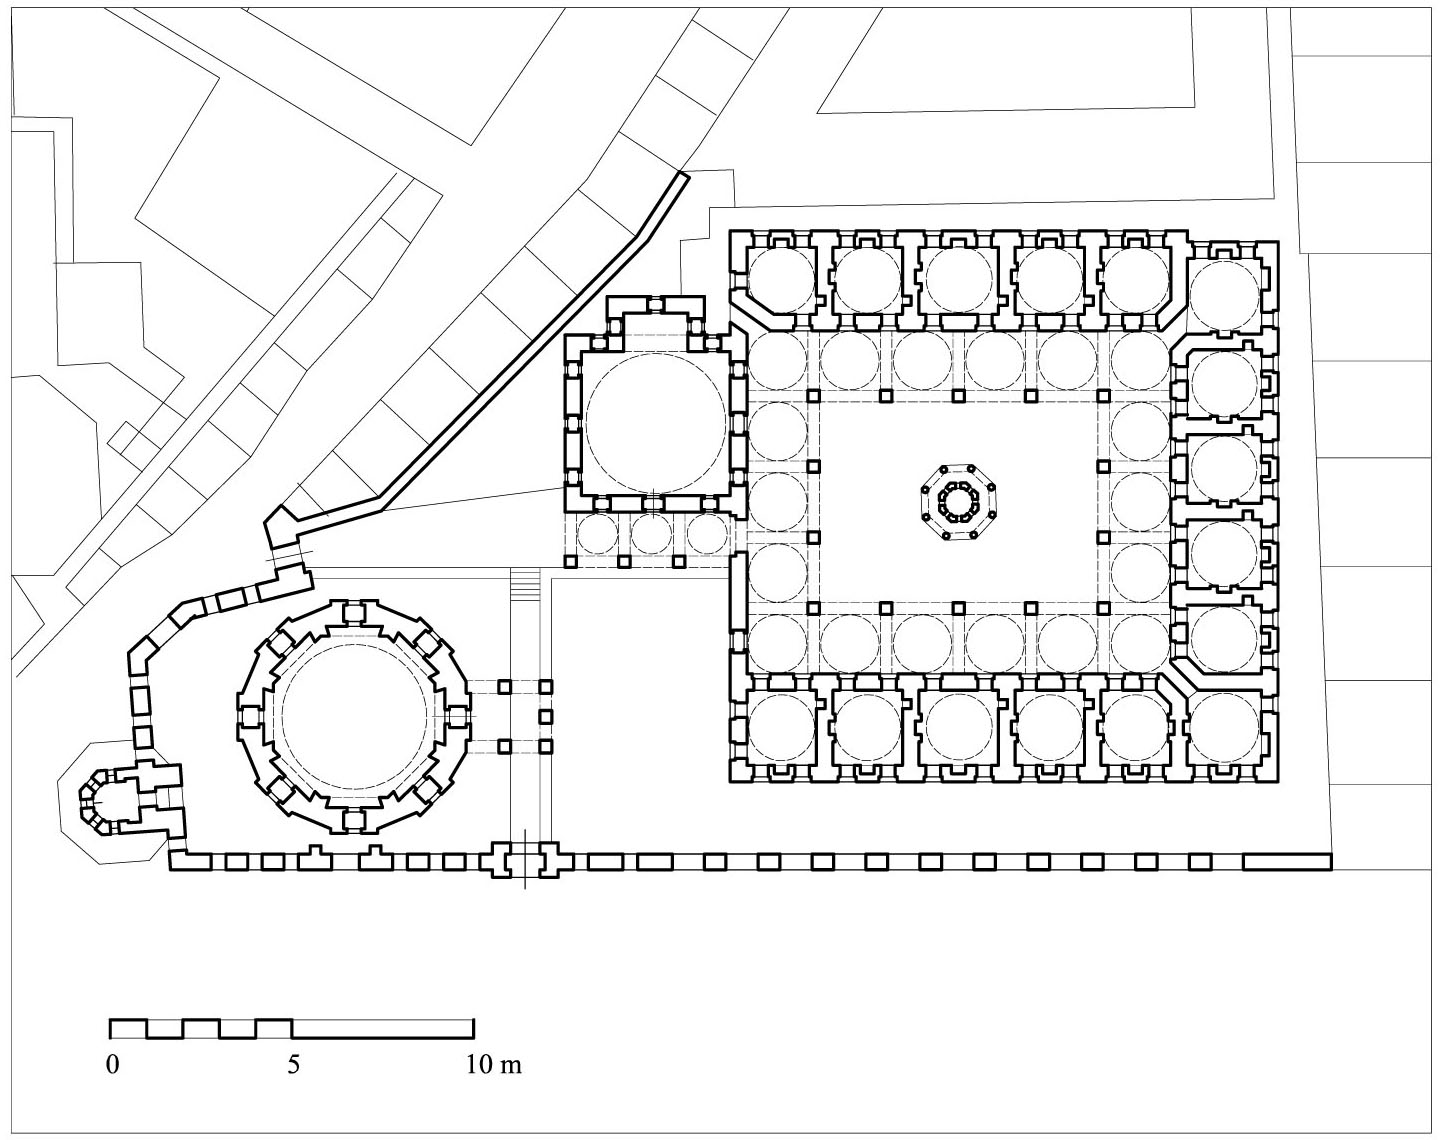 Koca Sinan Pasa Complex - Floor plan of complex. DWG file in AutoCAD 2000 format. Click the download button to download a zipped file containing the .dwg file.